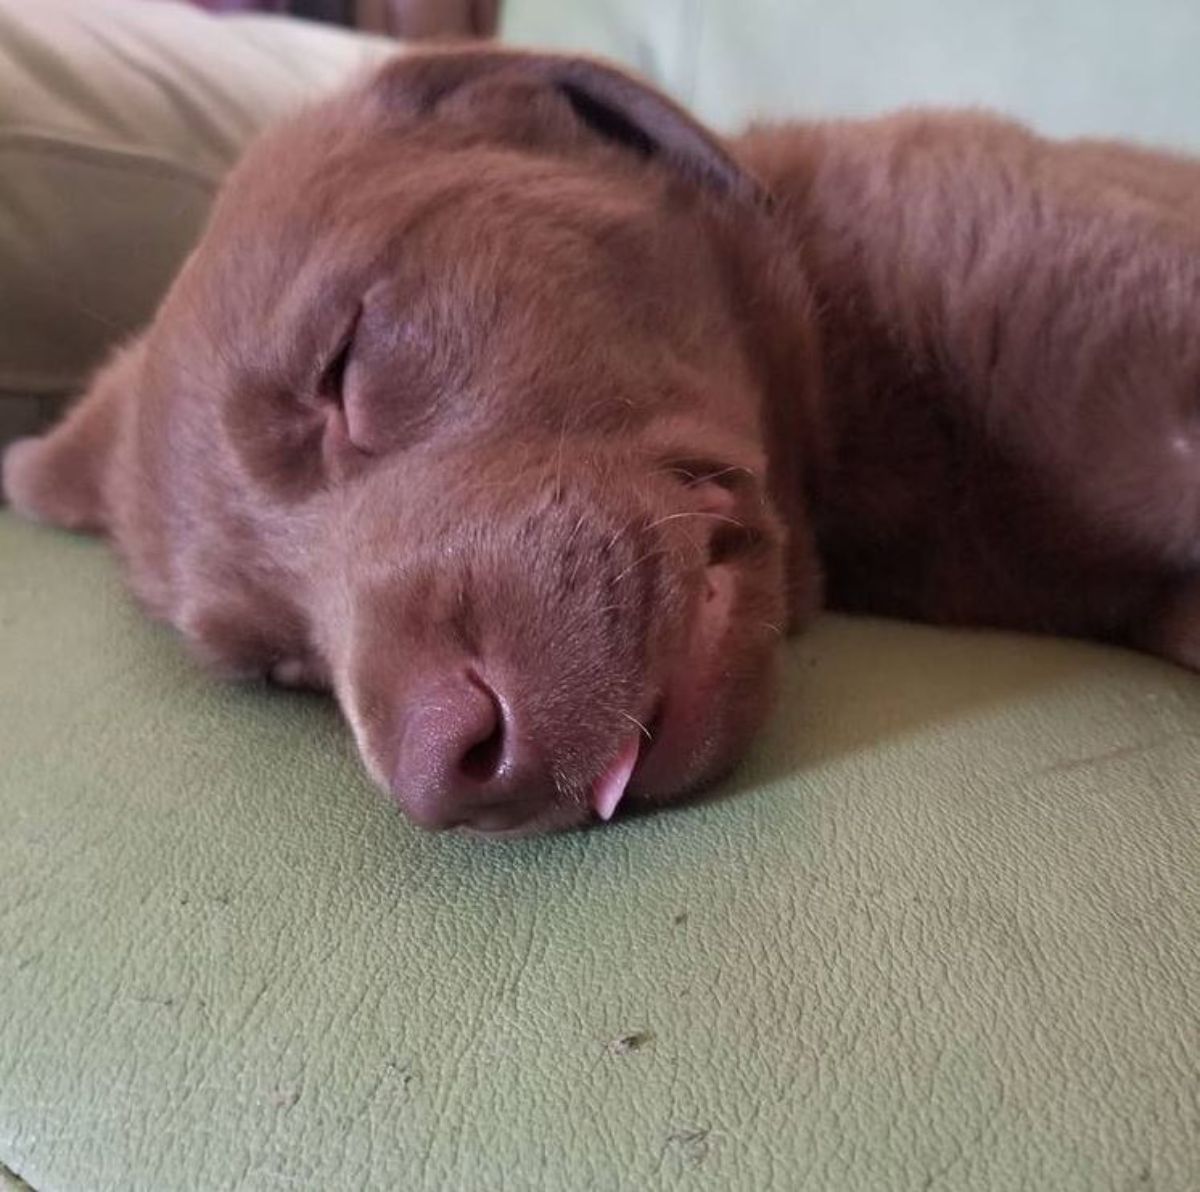 Chesapeake Bay Retriever dog lying on the couch sleeping soundly